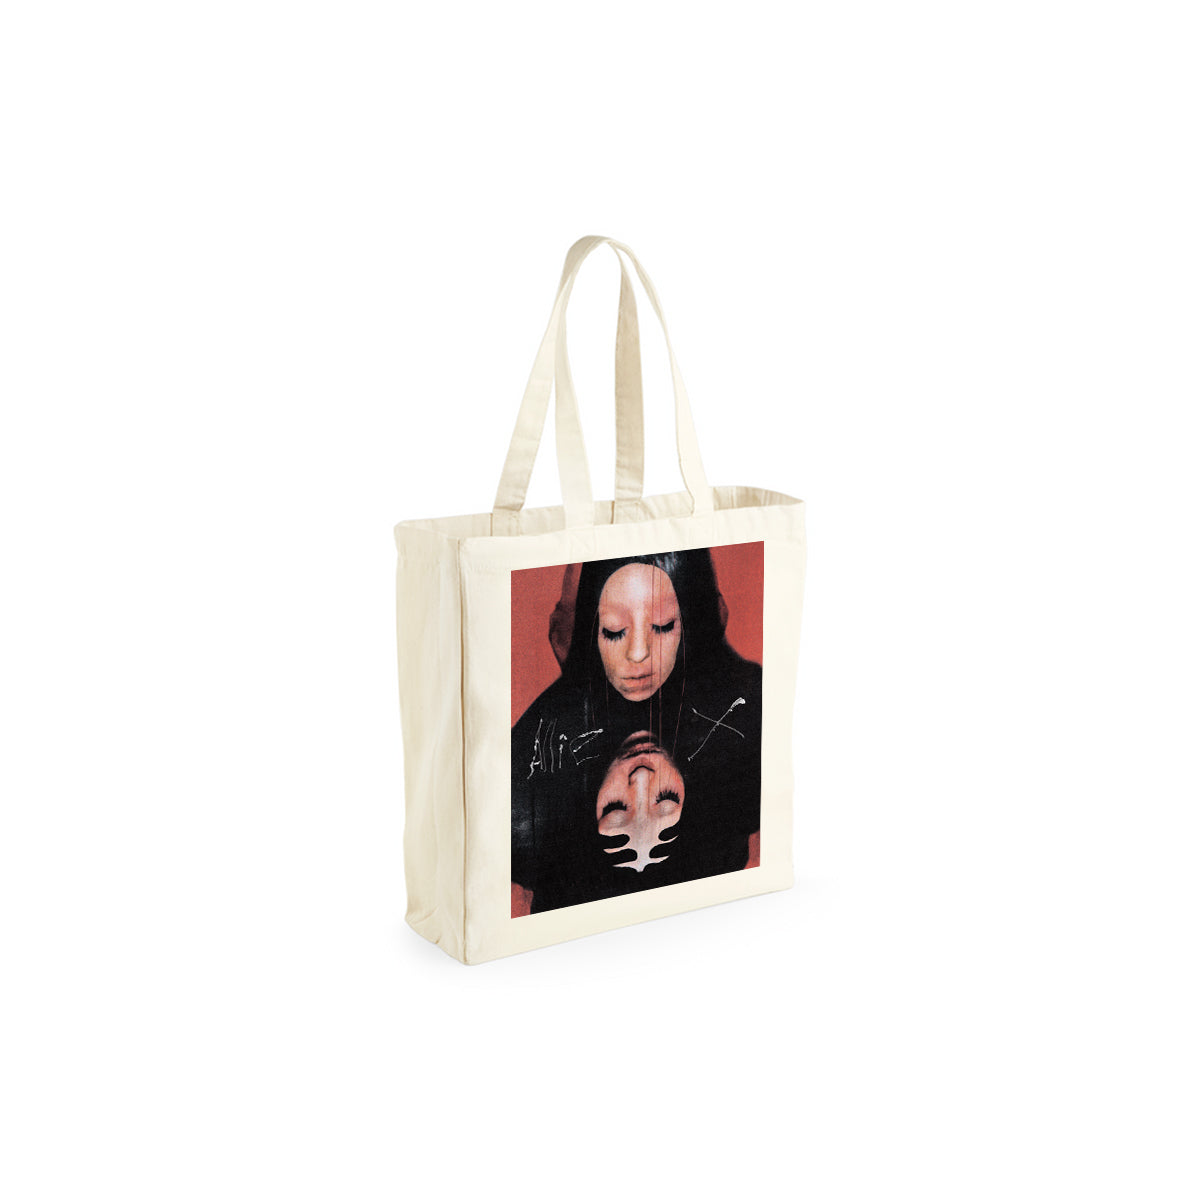 GIRL WITH NO FACE COLLAGE TOTE BAG